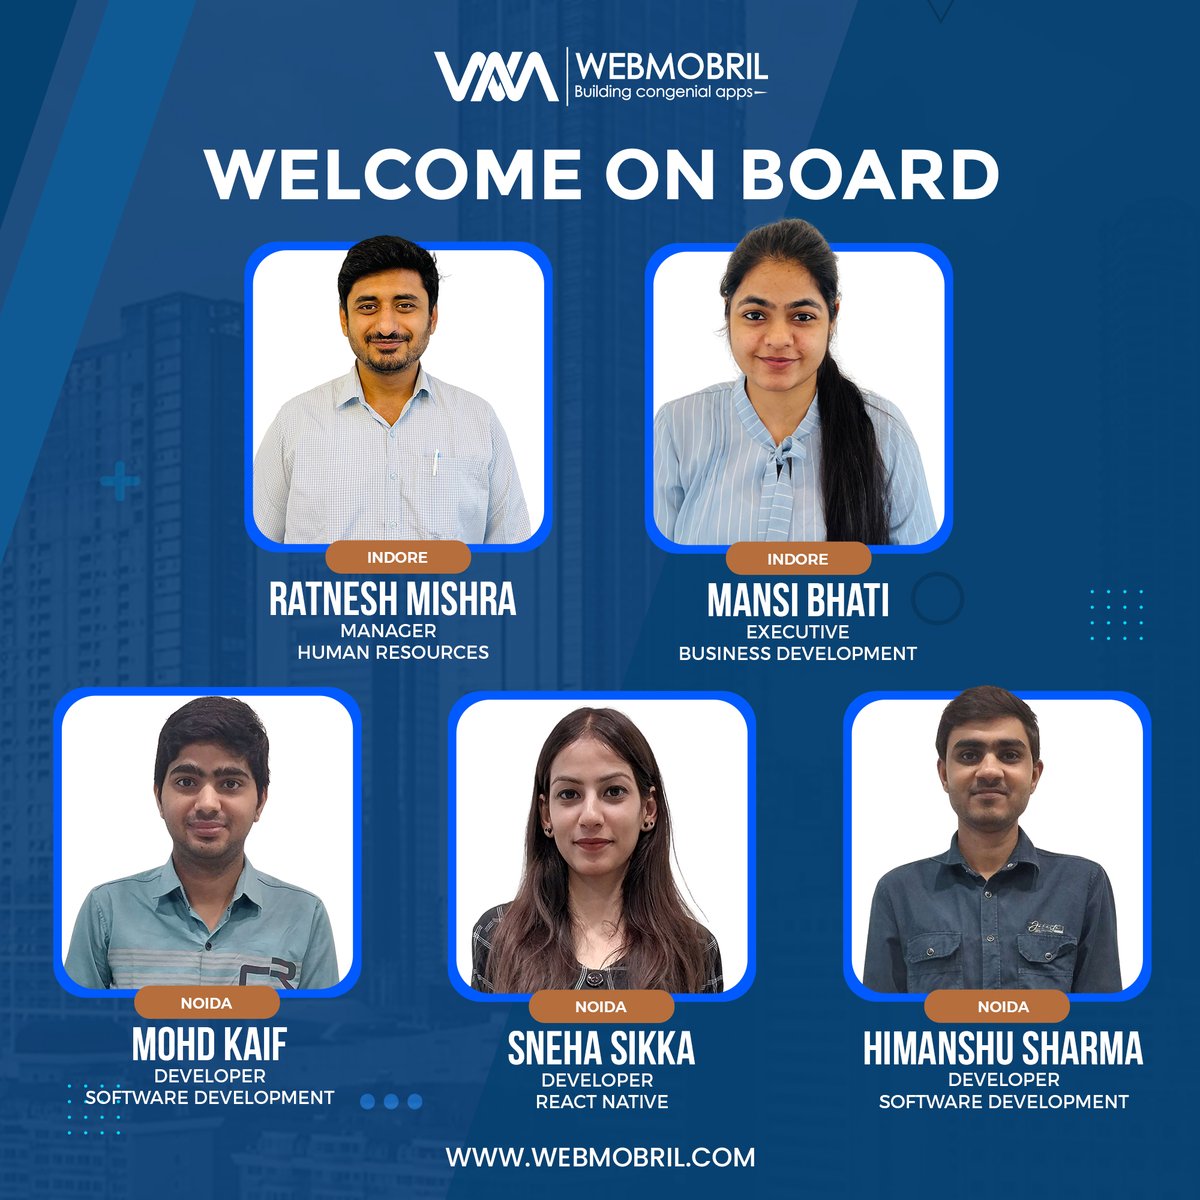 Welcome aboard!
Join us in extending a warm welcome to our new colleagues as they embark on this exciting journey with us.
Wishing them the best of luck in their new roles. Let's soar to new heights together!
#WelcomeOnBoard #NewBeginnings #TeamSuccess #newjoiners  #webmobril